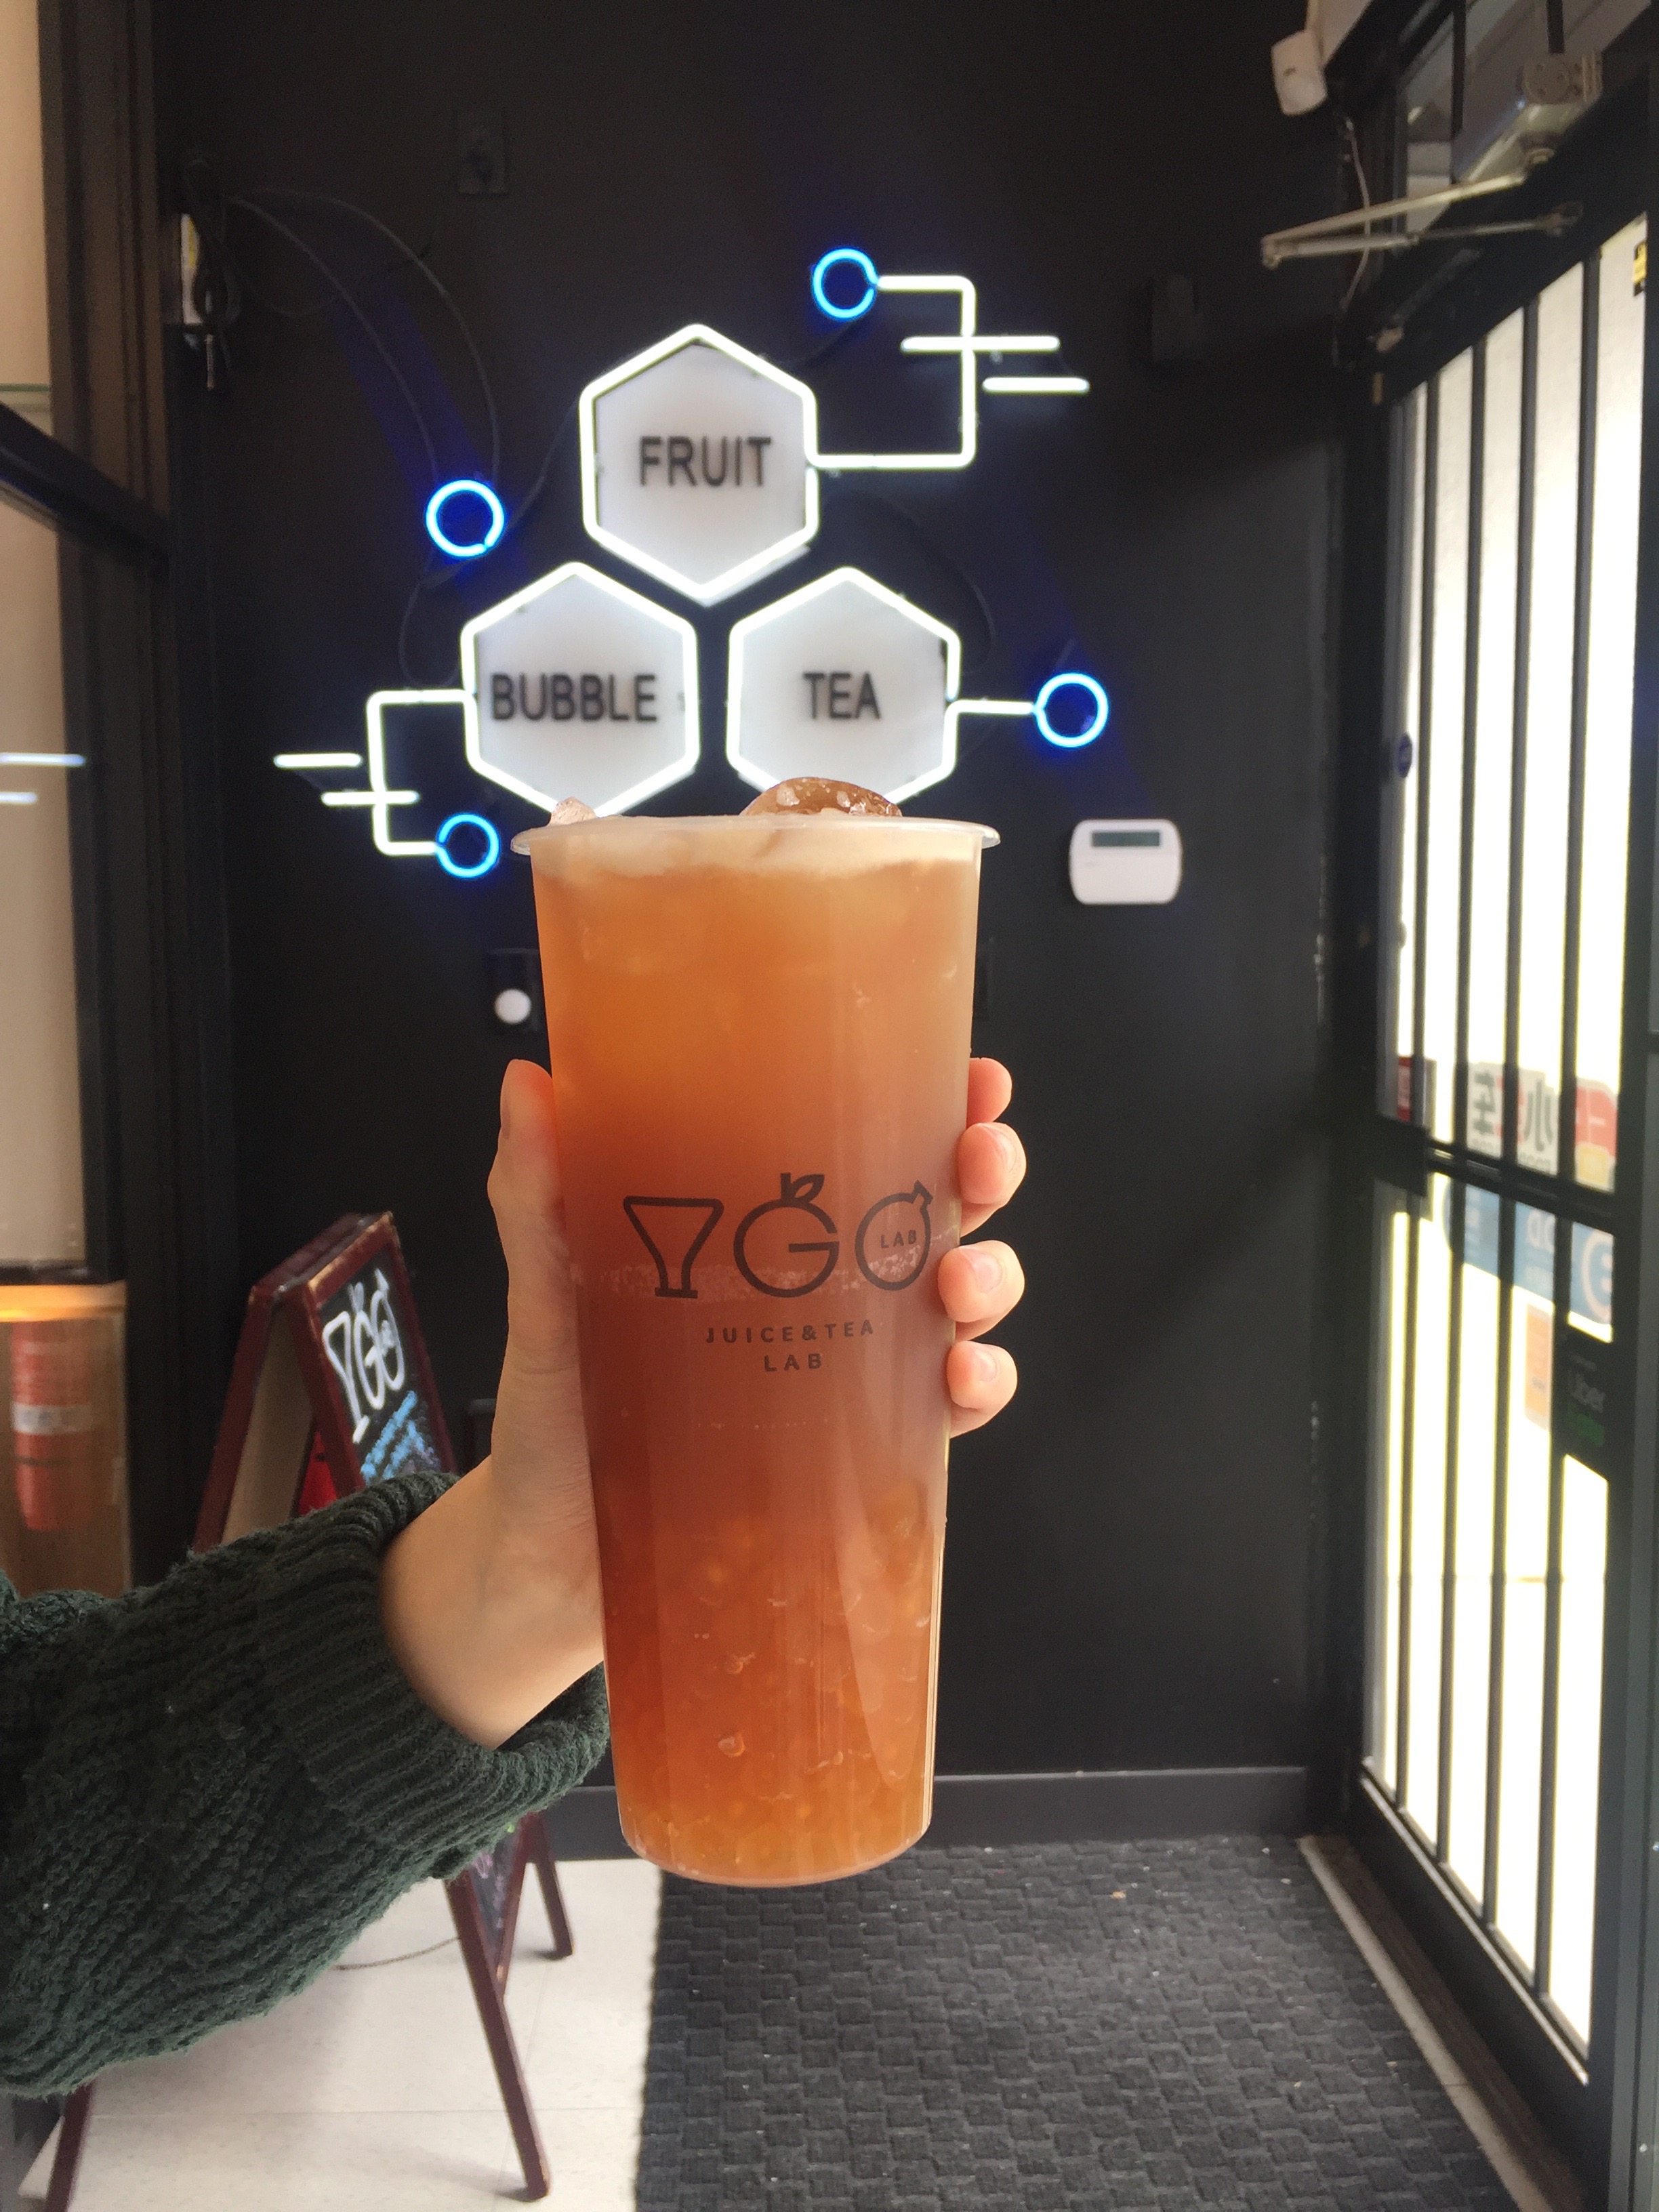 Heads up: There's a New Bubble Tea Place Near Campus! - Life @ U of T